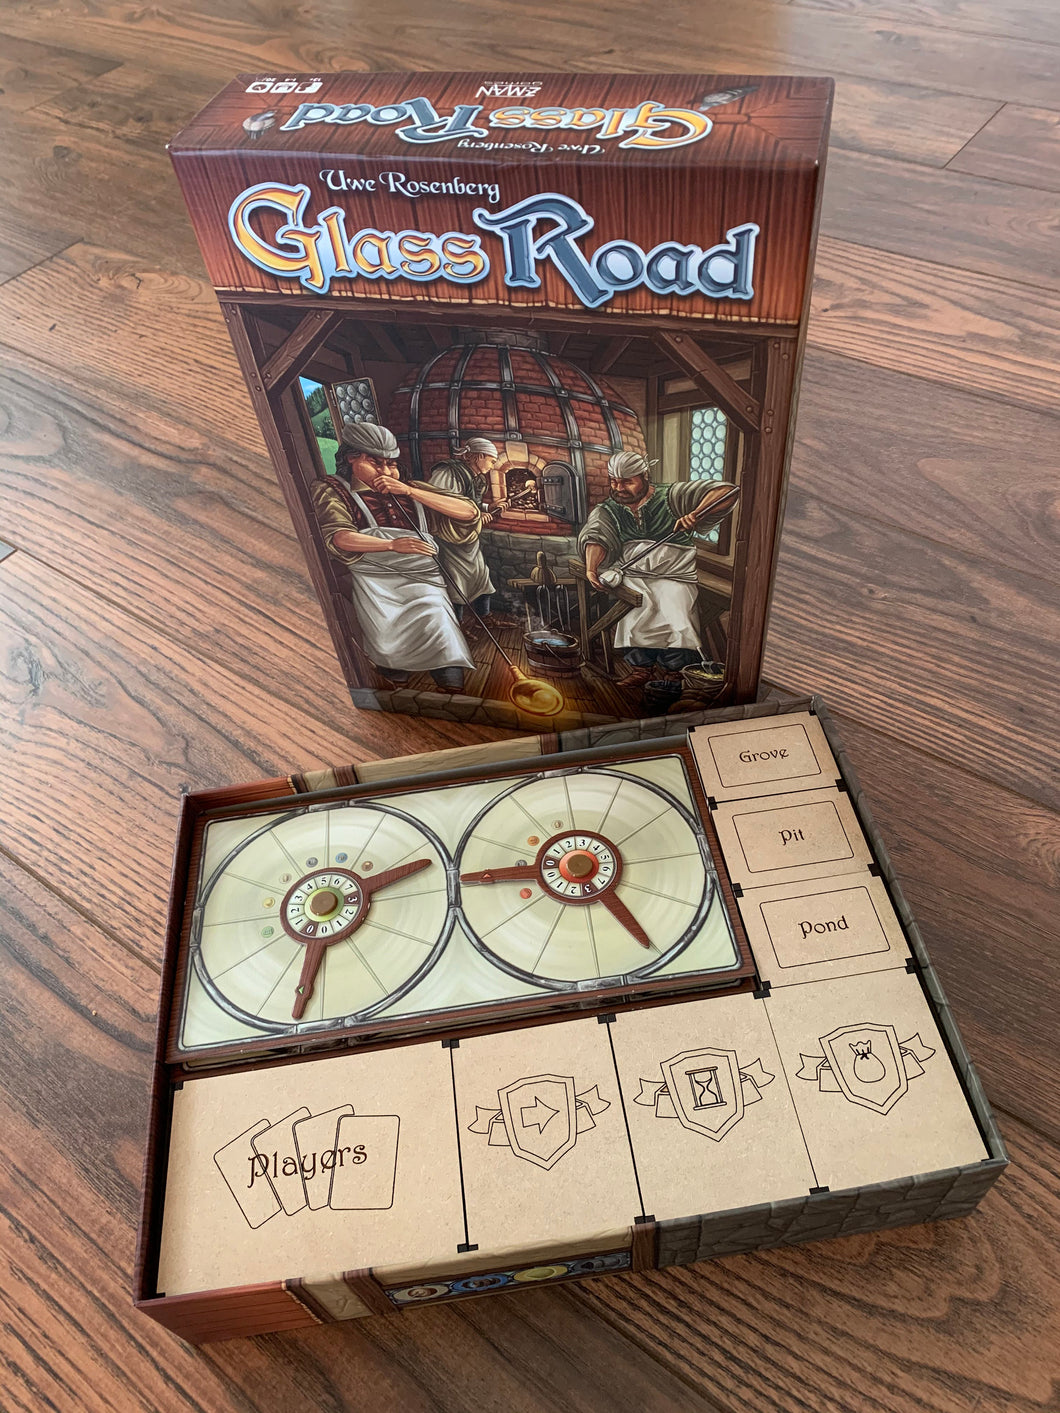 Organizer for Glass Road